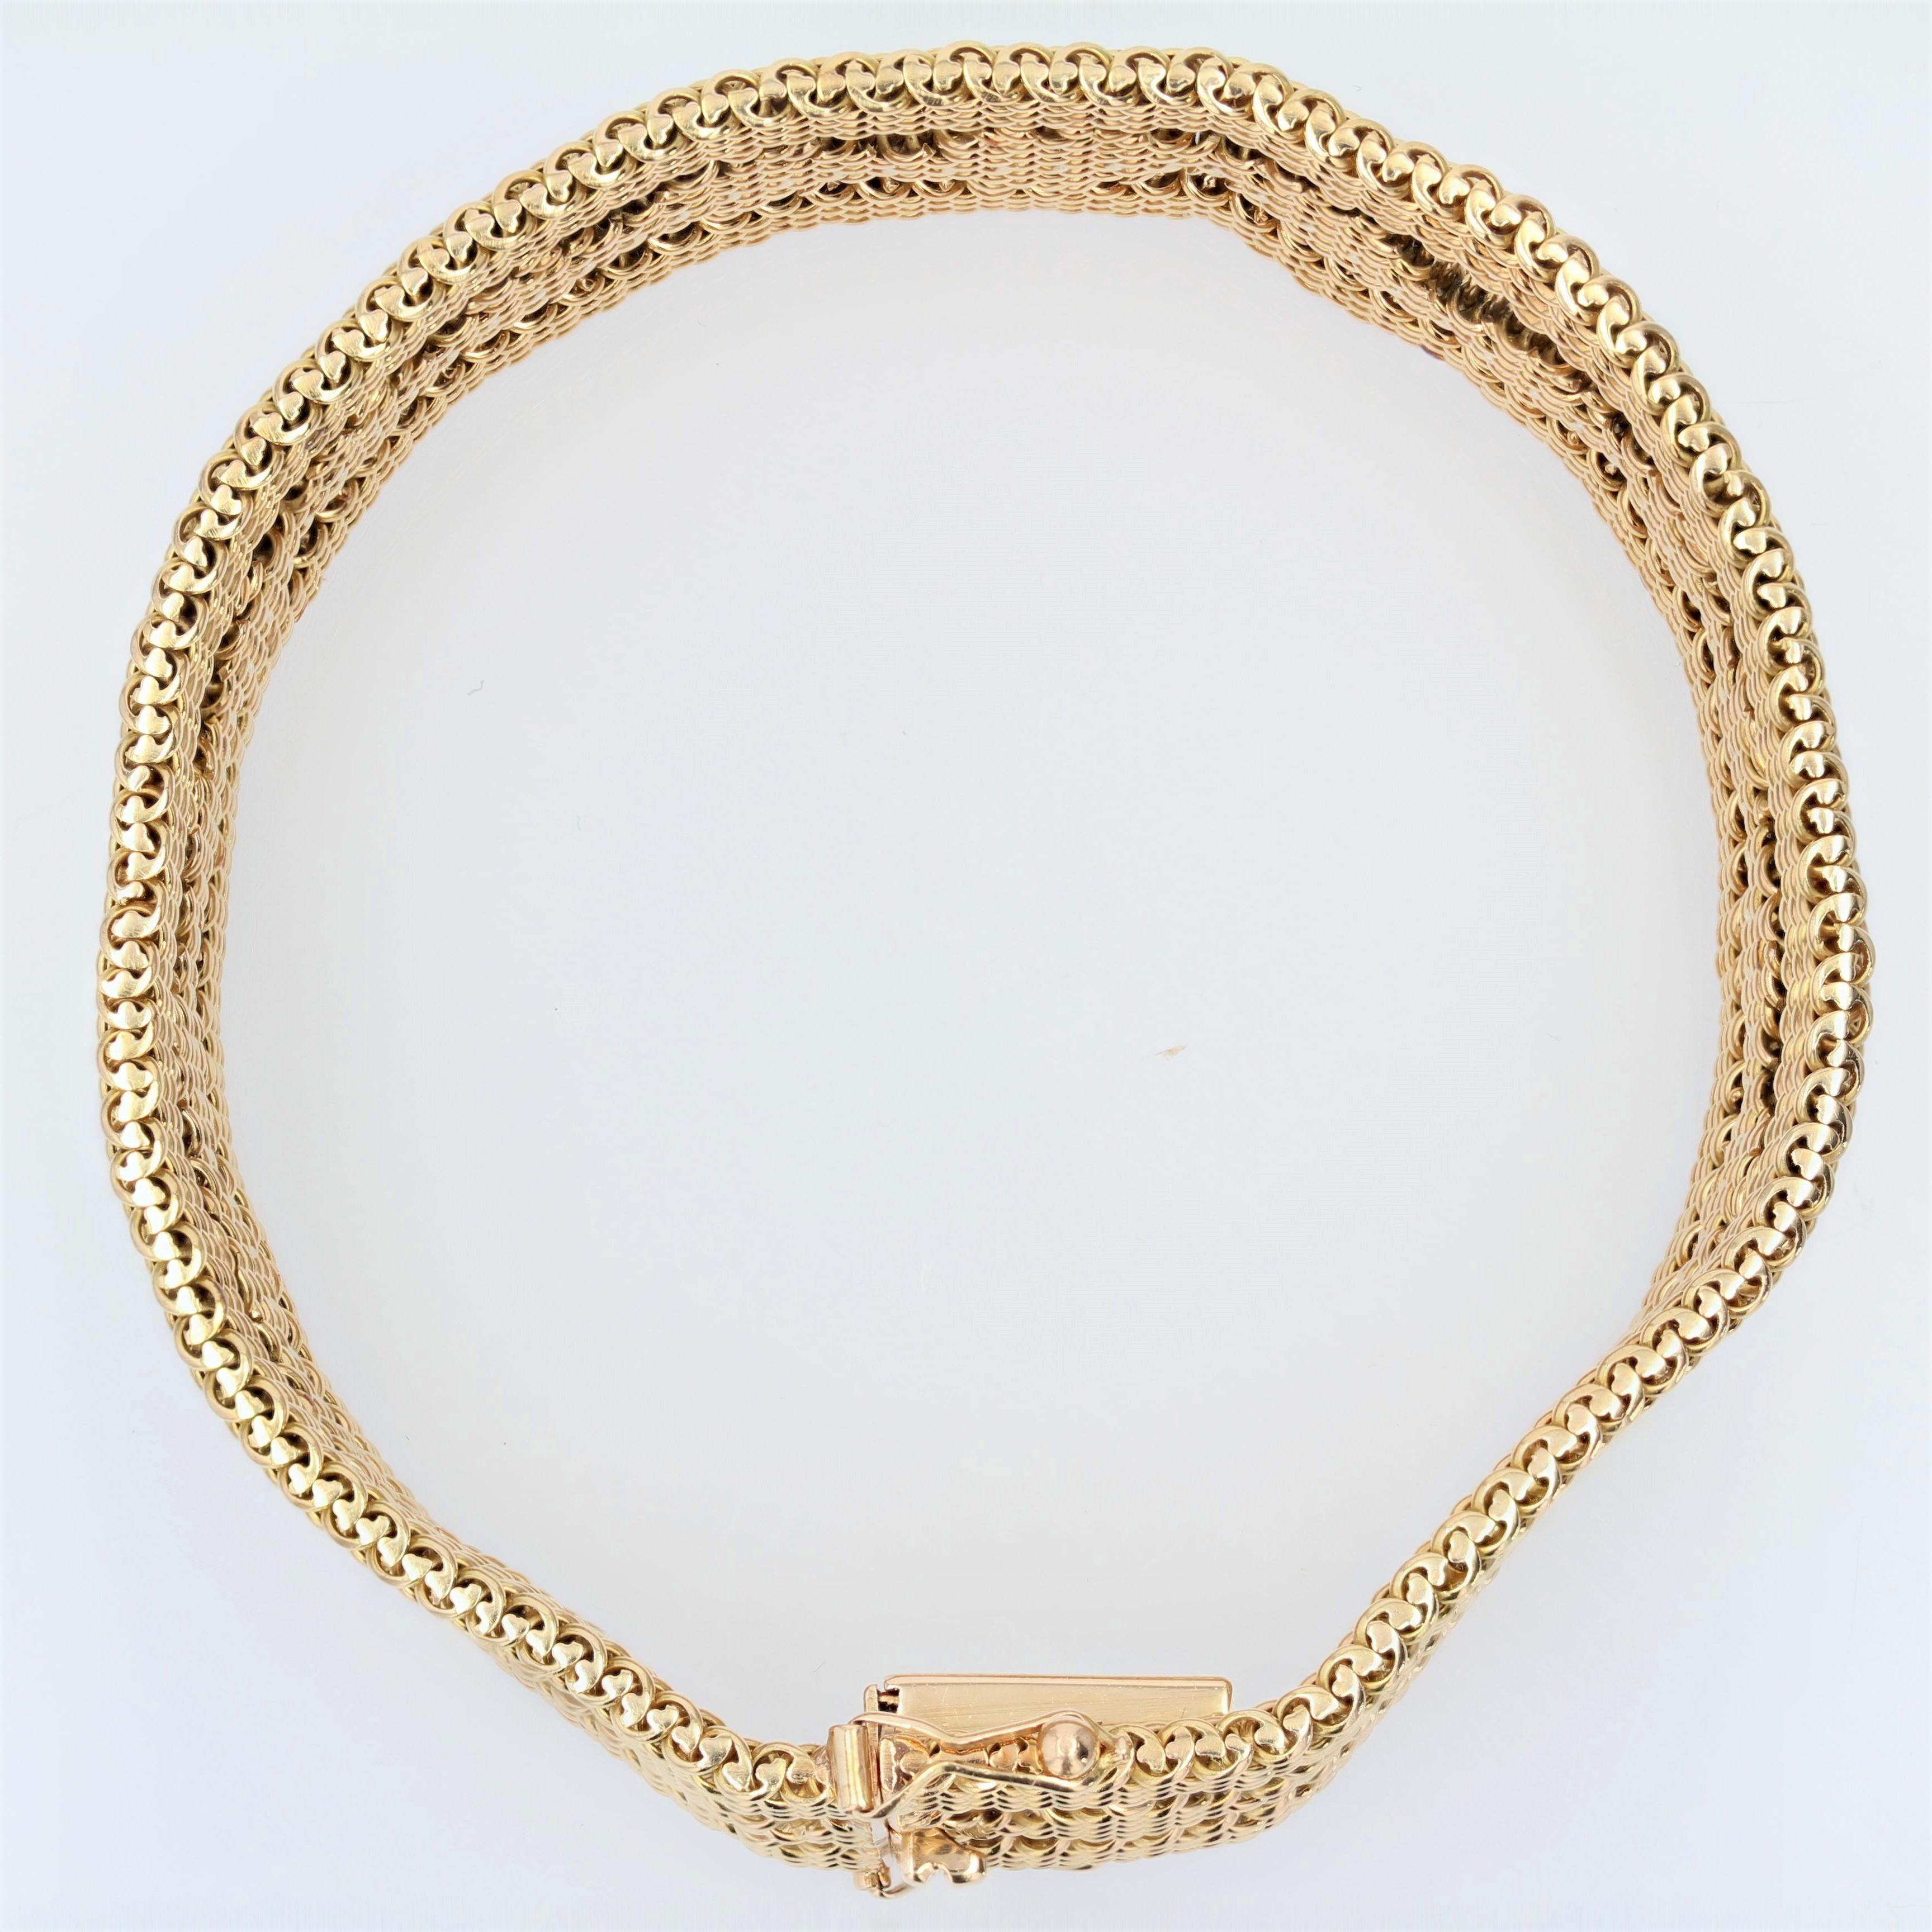 1960s Retro 18 Karat Yellow Gold Woven Bracelet In Excellent Condition For Sale In Poitiers, FR